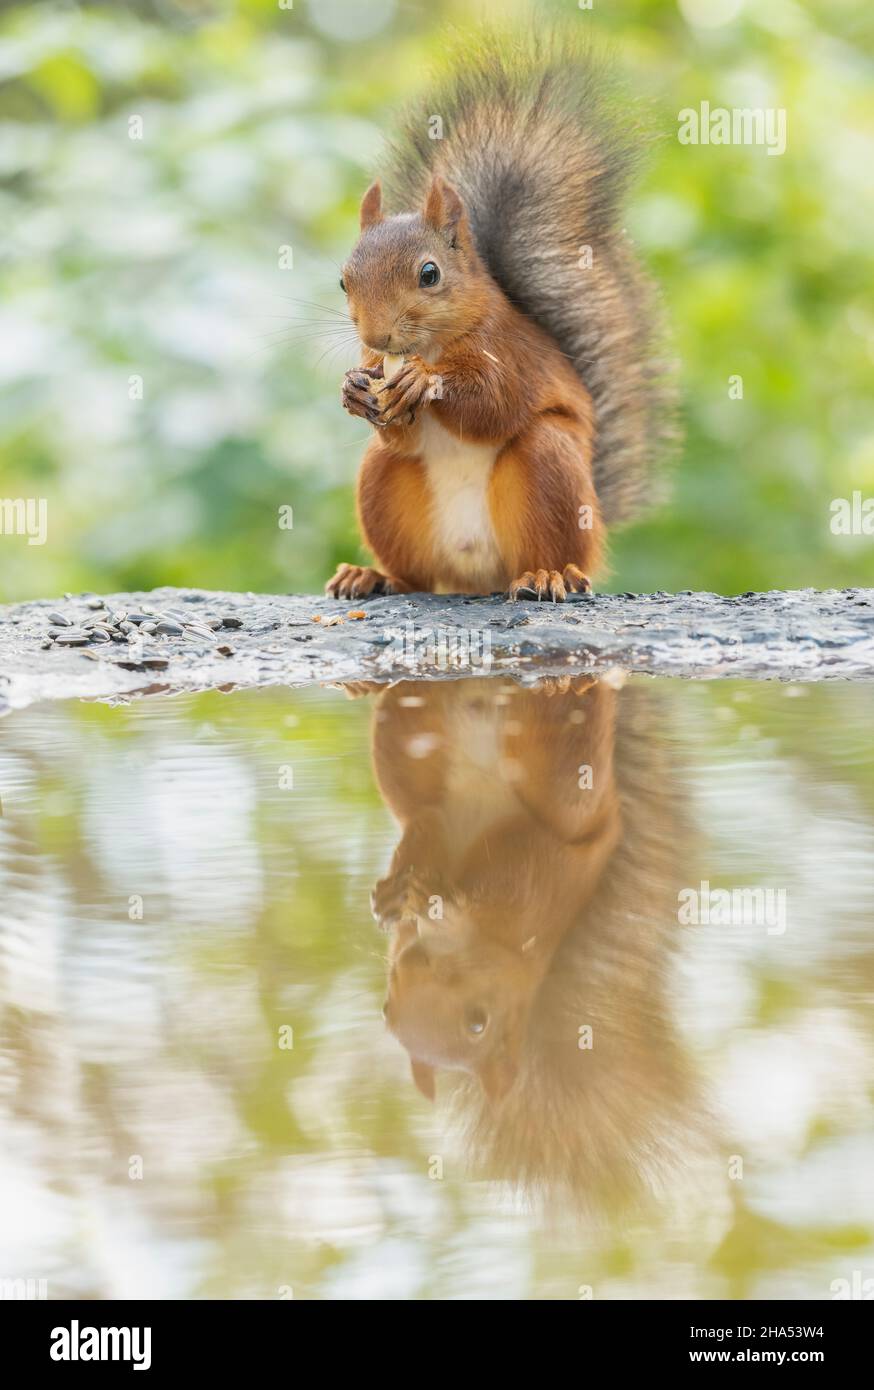 red squirrel is holding a nut reflected in water Stock Photo